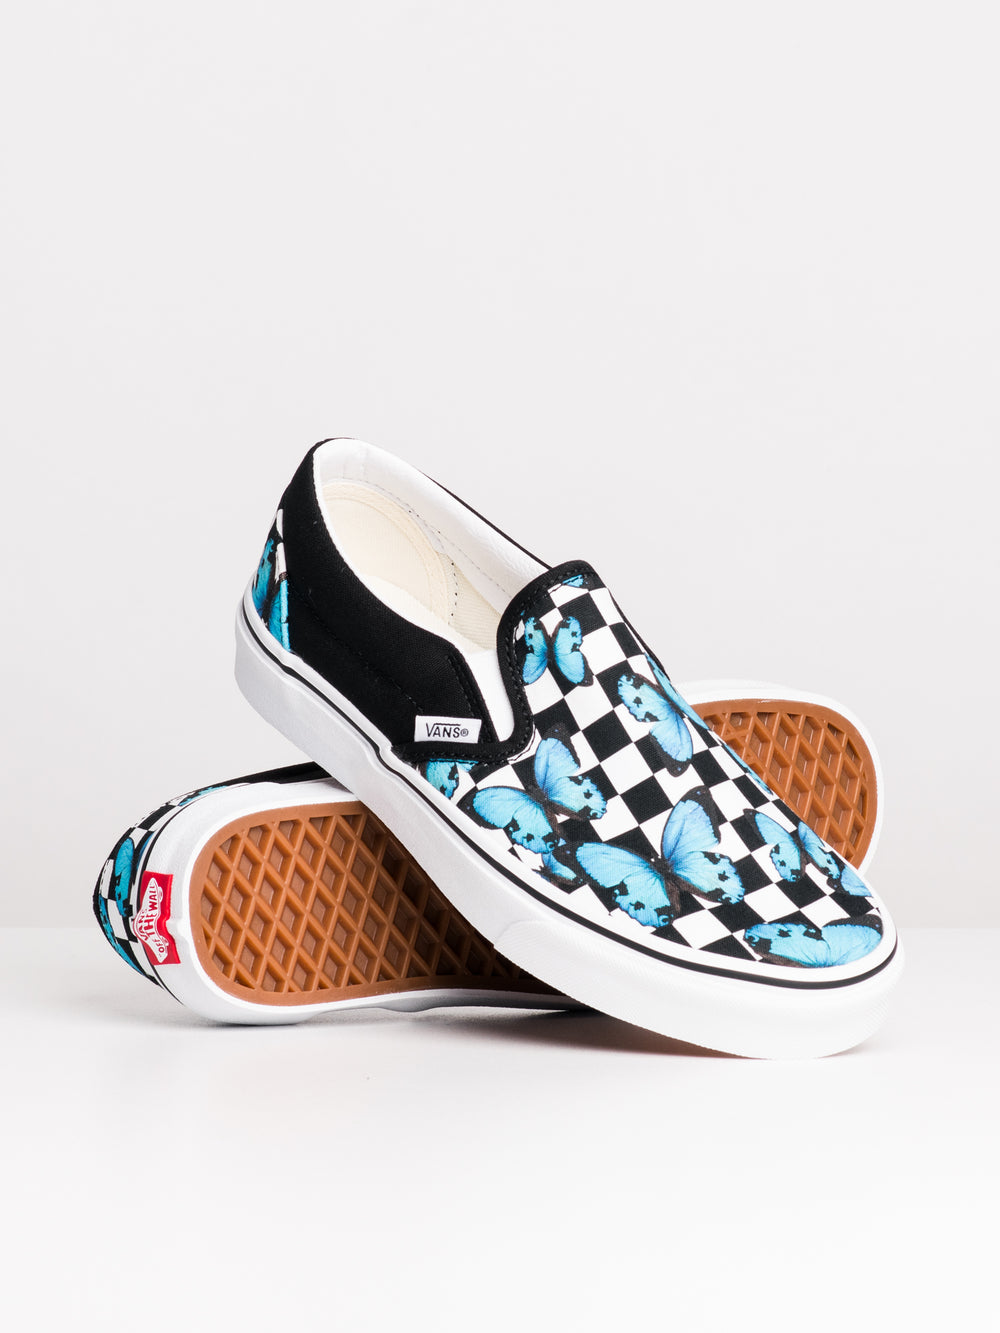 WOMENS VANS CL SLIP ON - BUTTERFLY CHECK - CLEARANCE